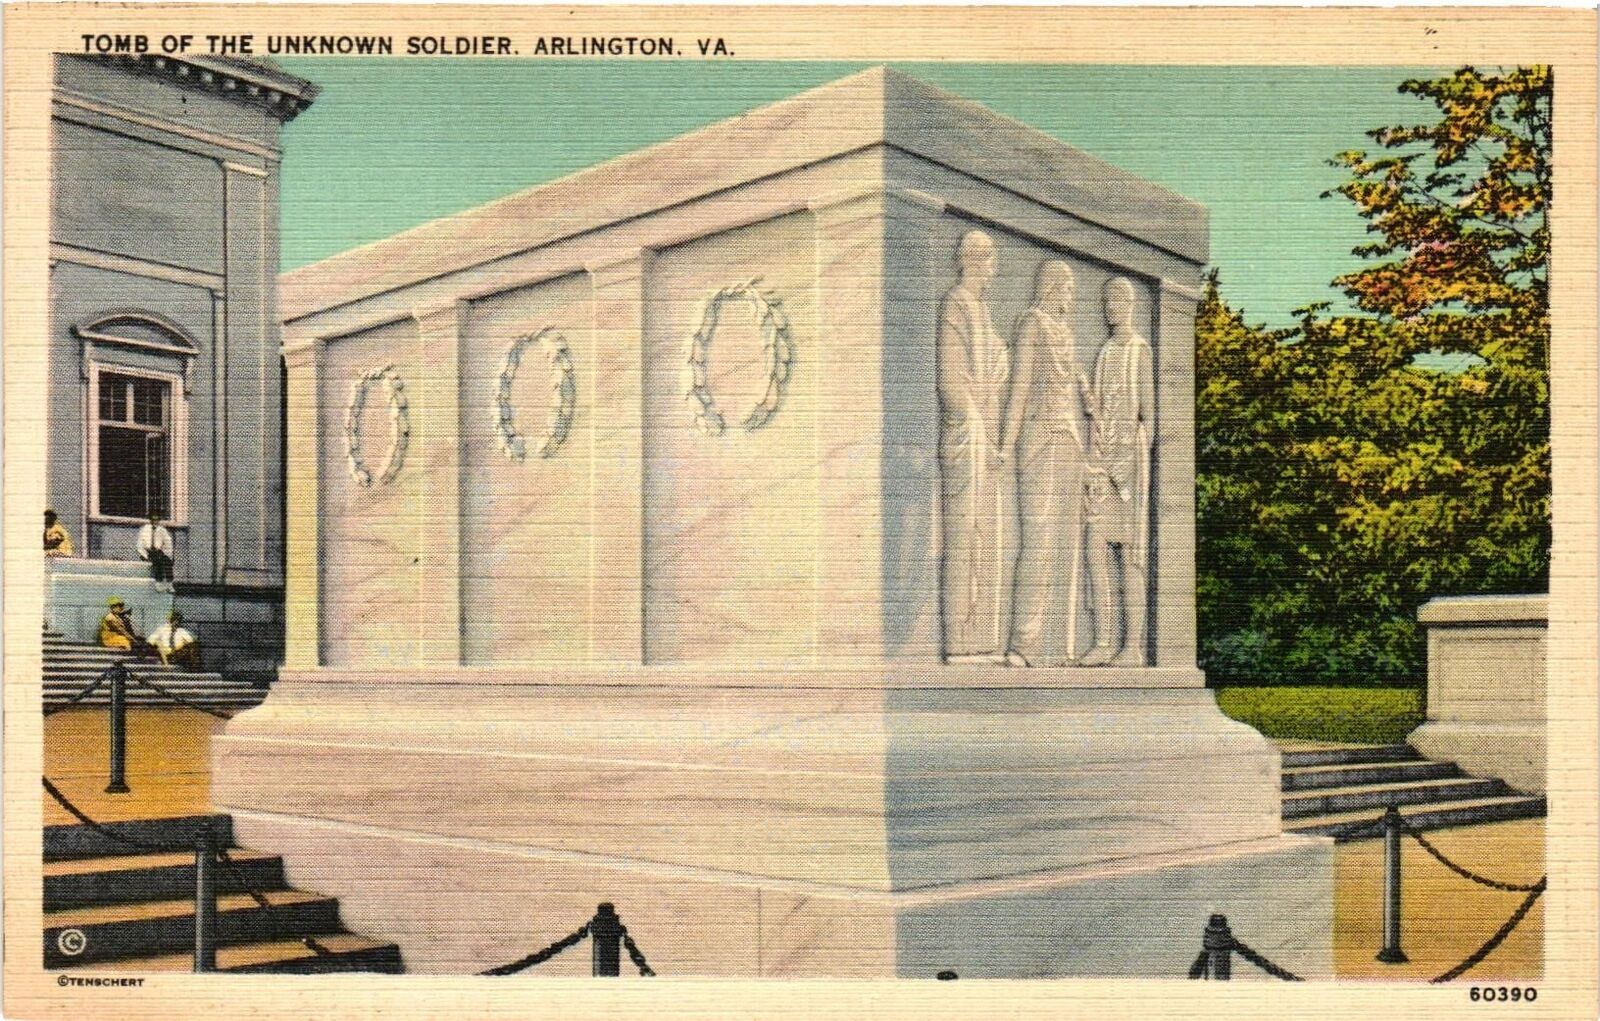 Vintage Postcard- TOMB OF THE UNKNOWN SOLDIER, ARLINGTON, VA. Early 1900s